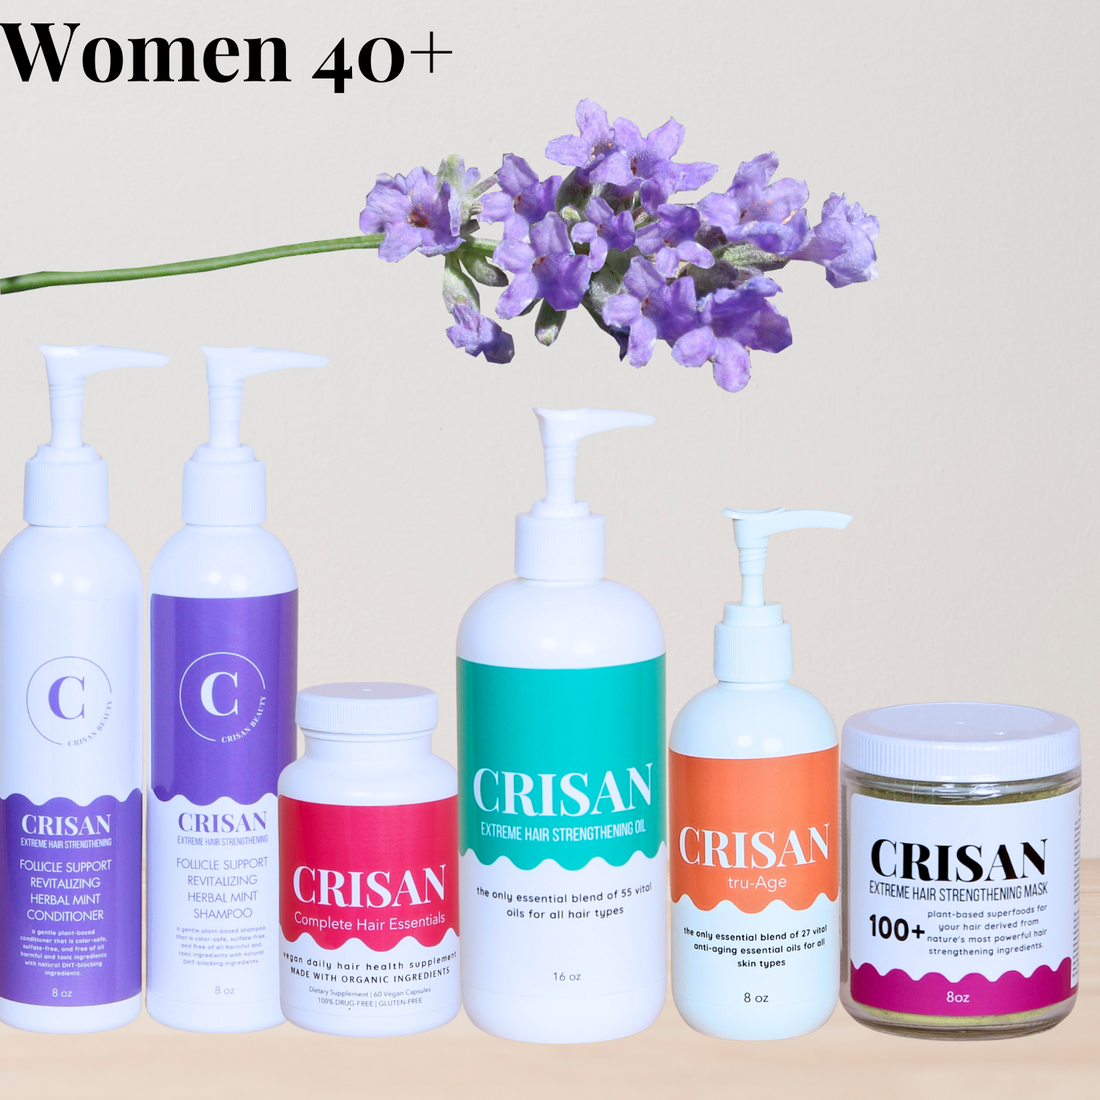 A variety of organic hair care products for women with thinning hair, displayed with natural elements like leaves and flowers.